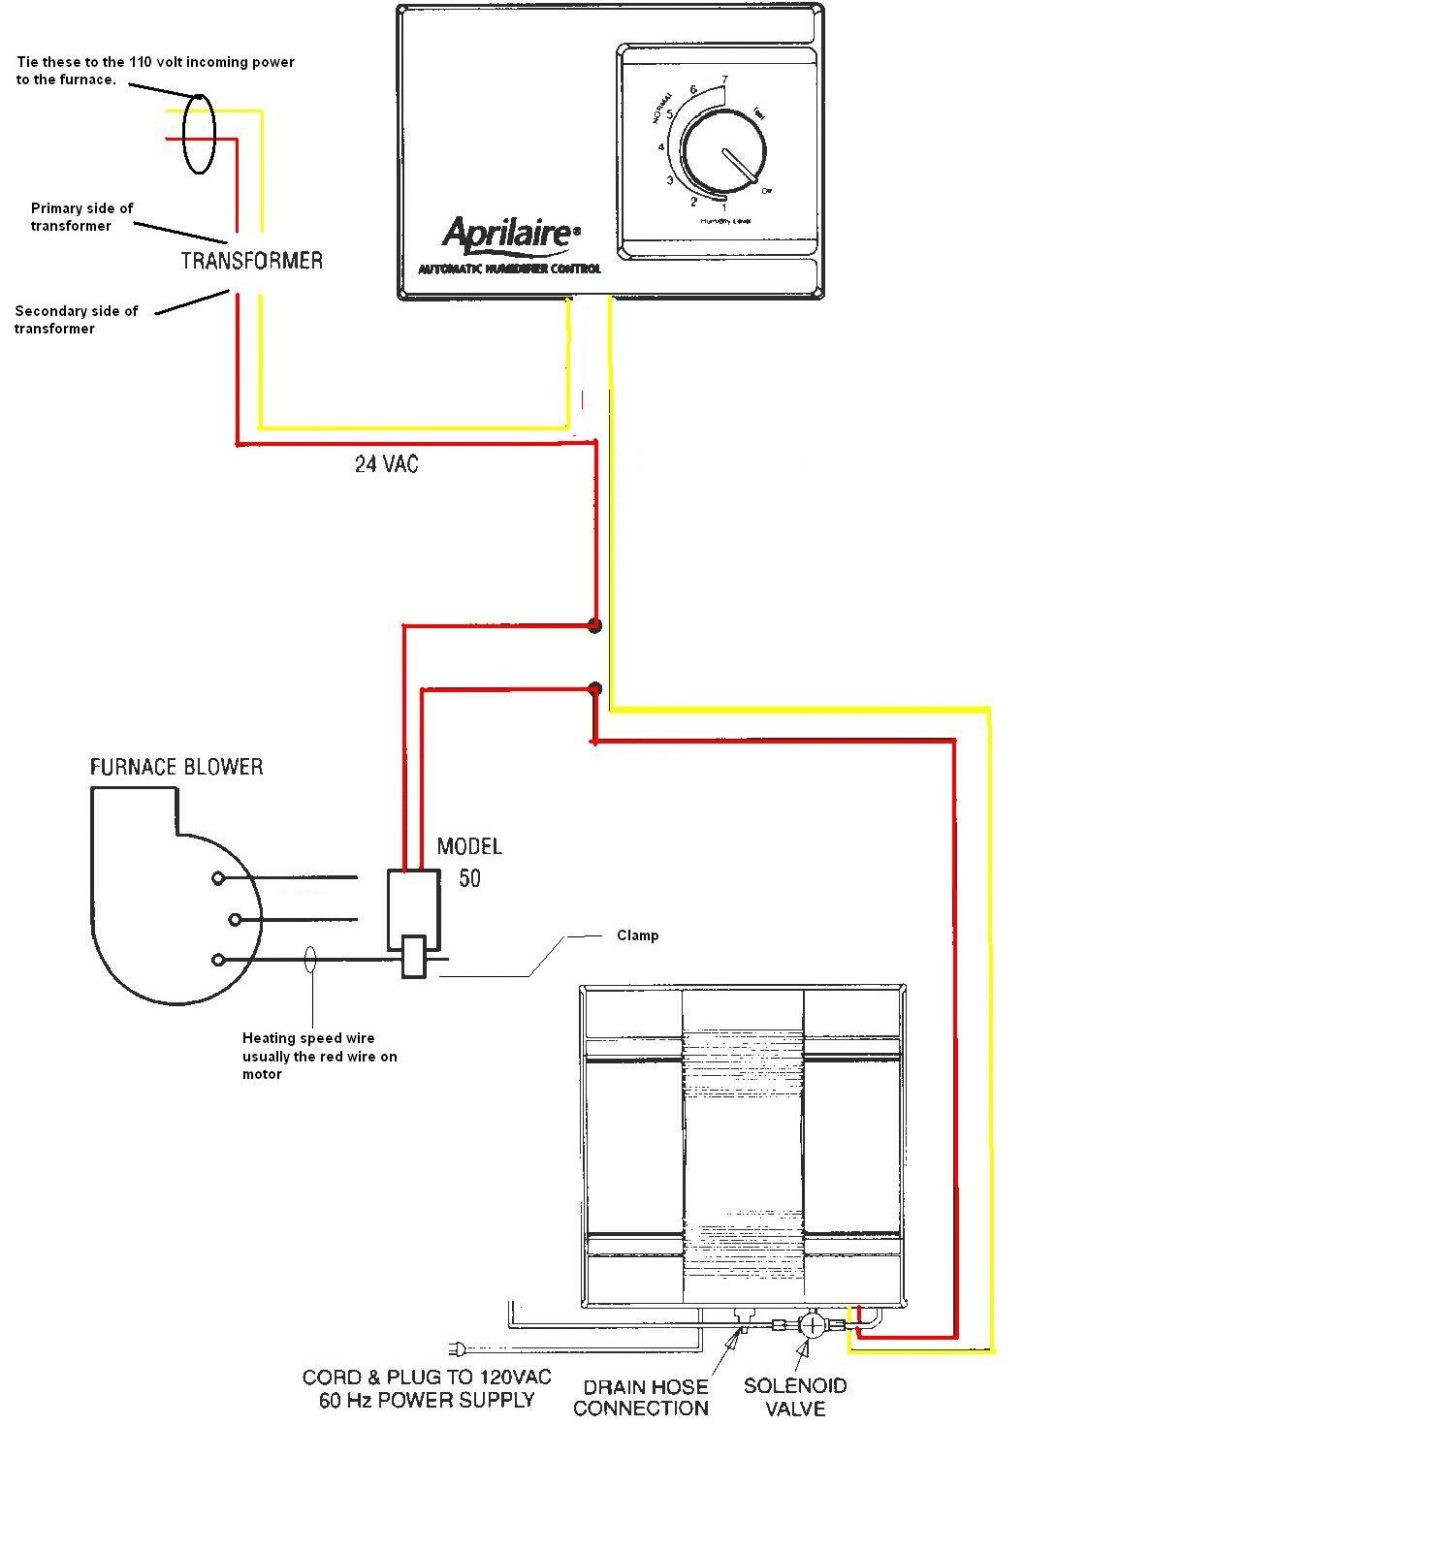 Wiring Diagram For House Fan Fresh Whole House Fan Wiring Diagram Motor How To Wire Speed Switch Timer